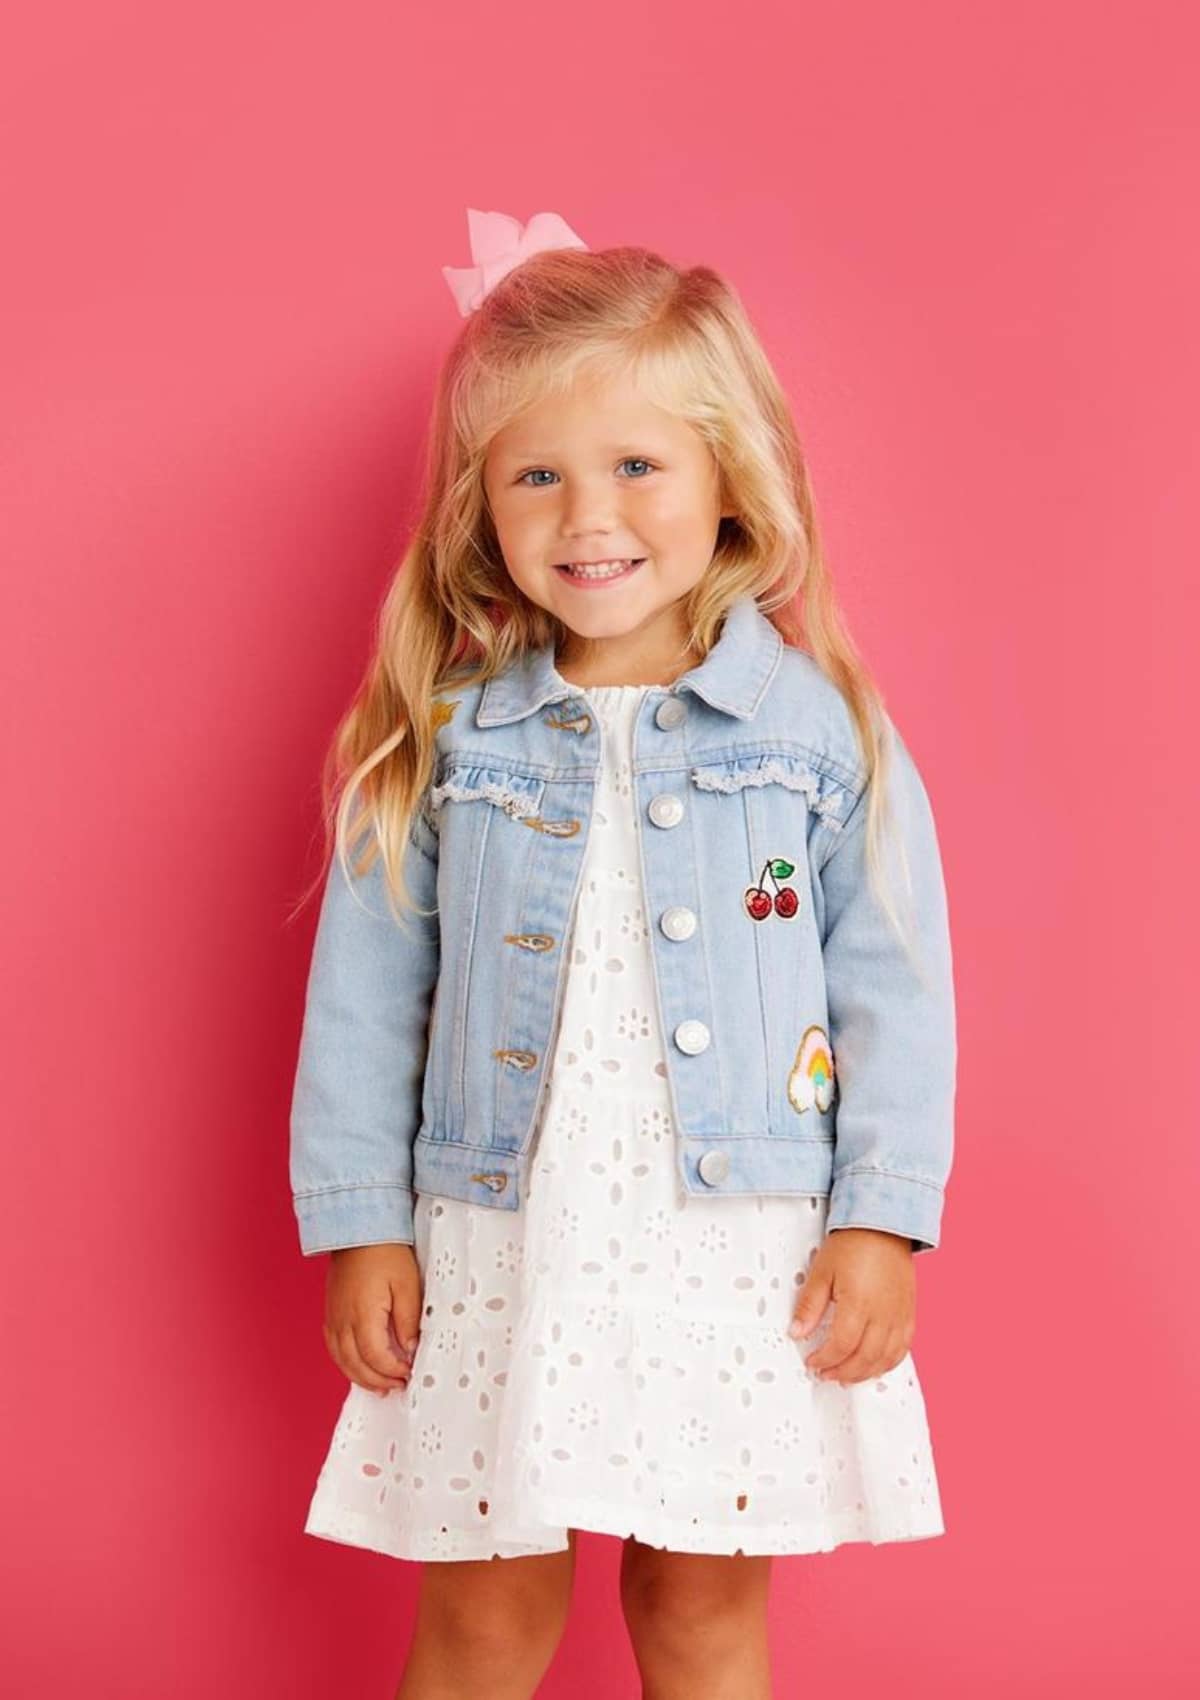 Clothing For the Littles-New Clothing For the Littles-Toddlers + Preschoolers-Ruby Jane.